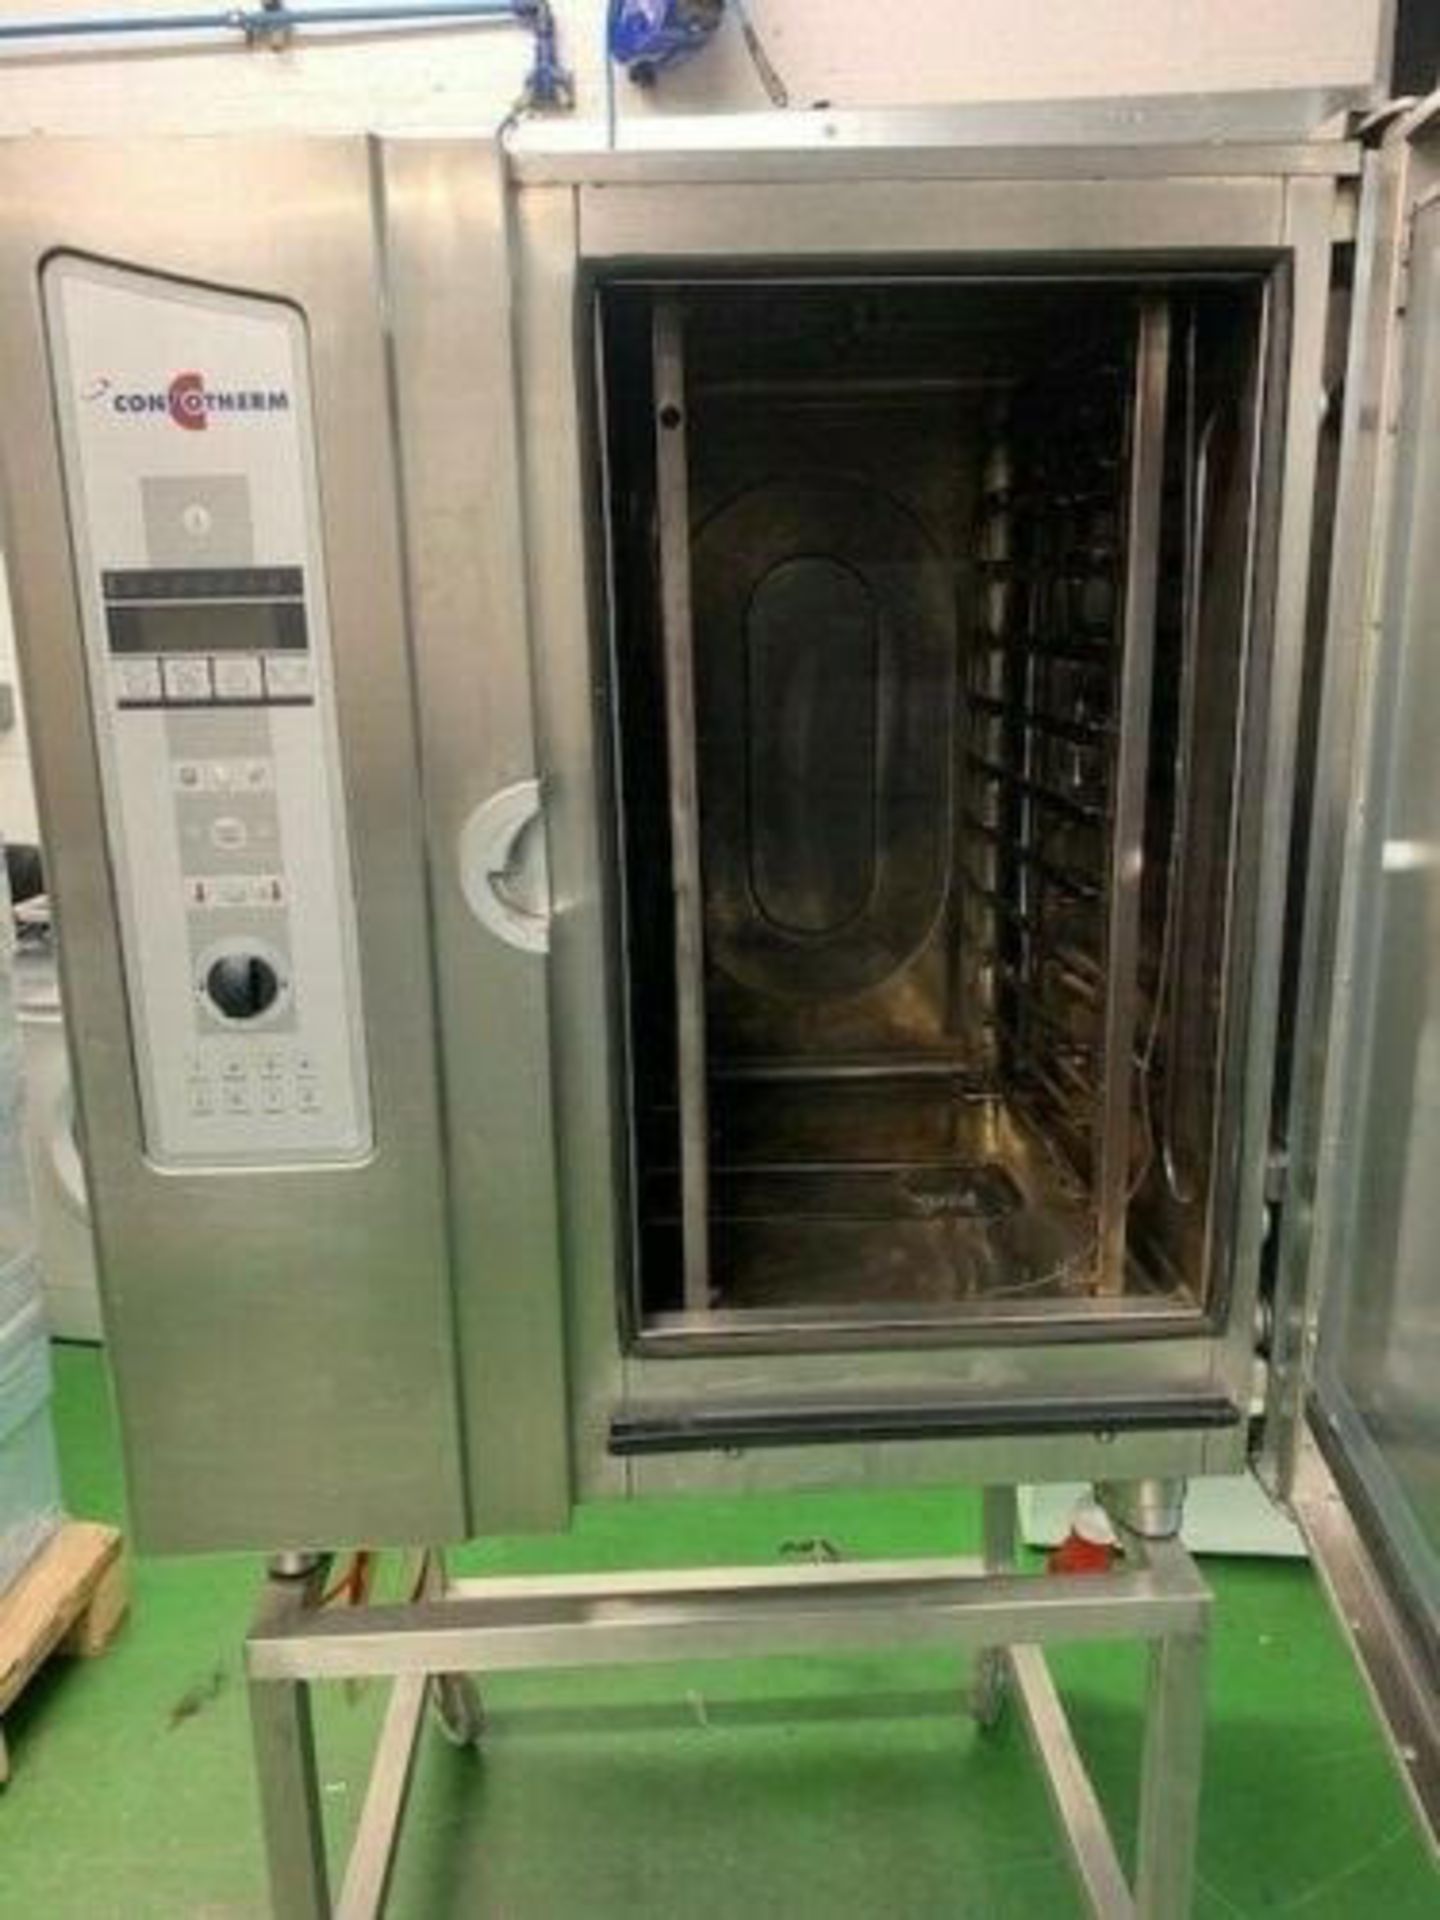 1 x Convotherm Combination Oven-Steamer - 3 Phase Electric - Model OEB 10.10 - CL531 - Location: - Image 5 of 6